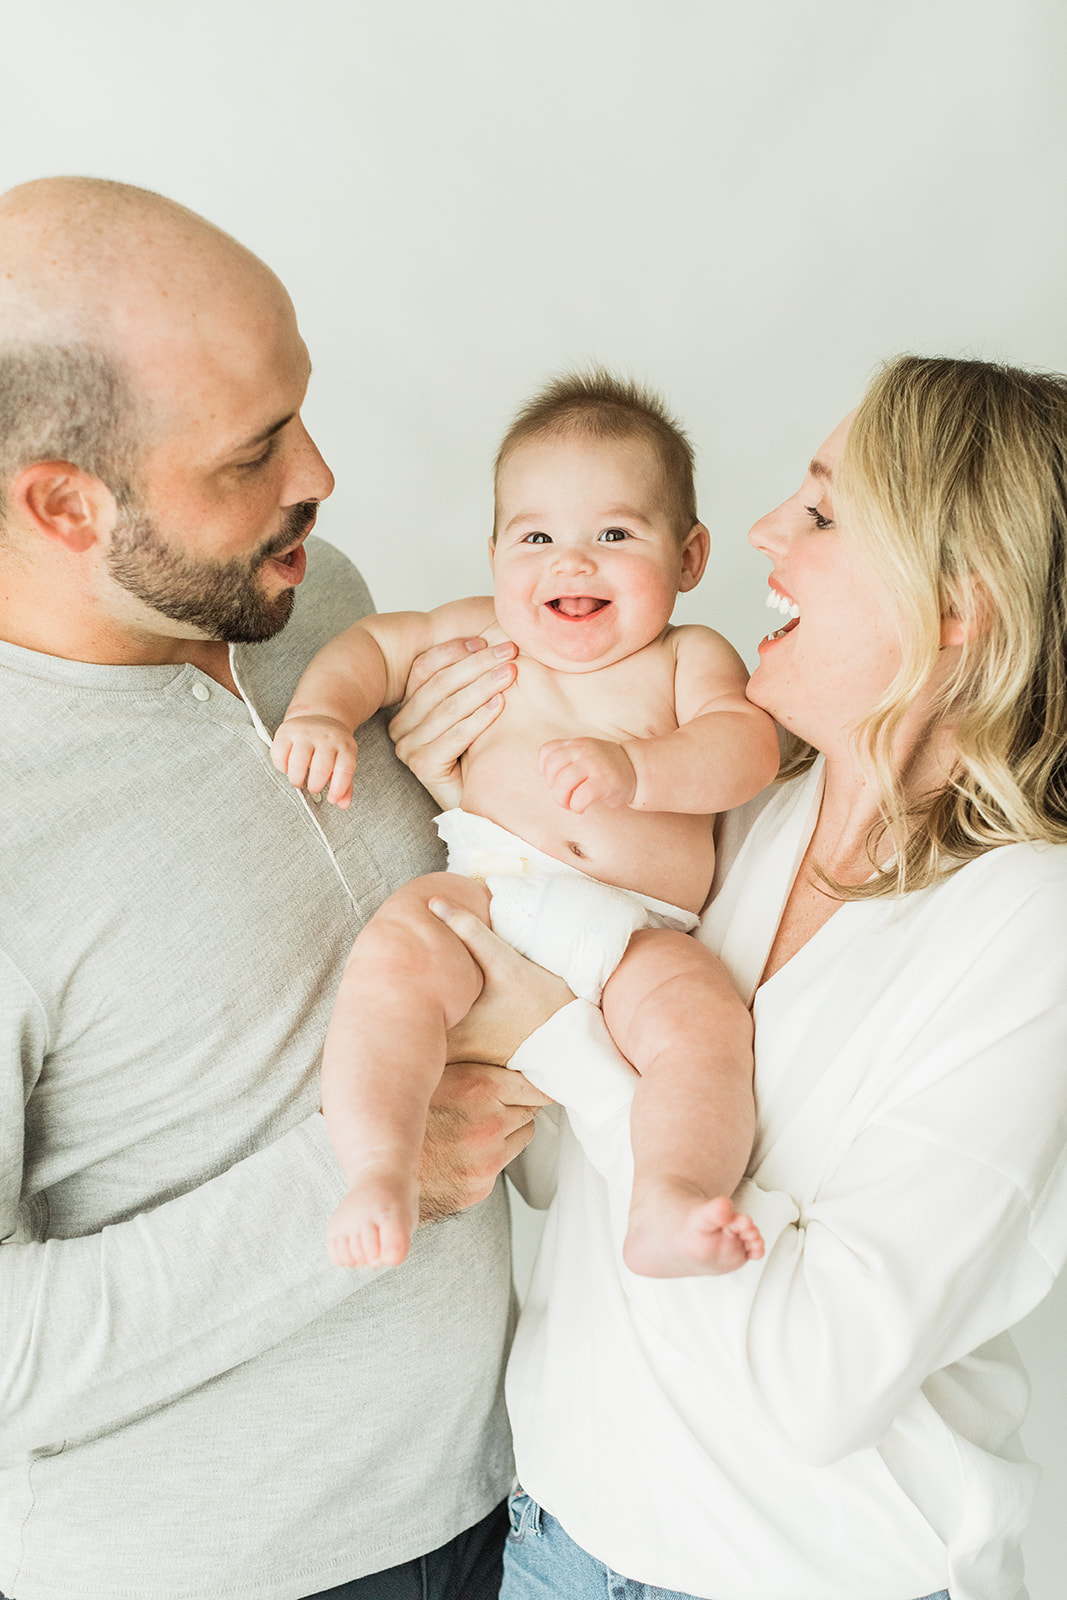 6 month milestone session in nashville studio. parents with baby boy